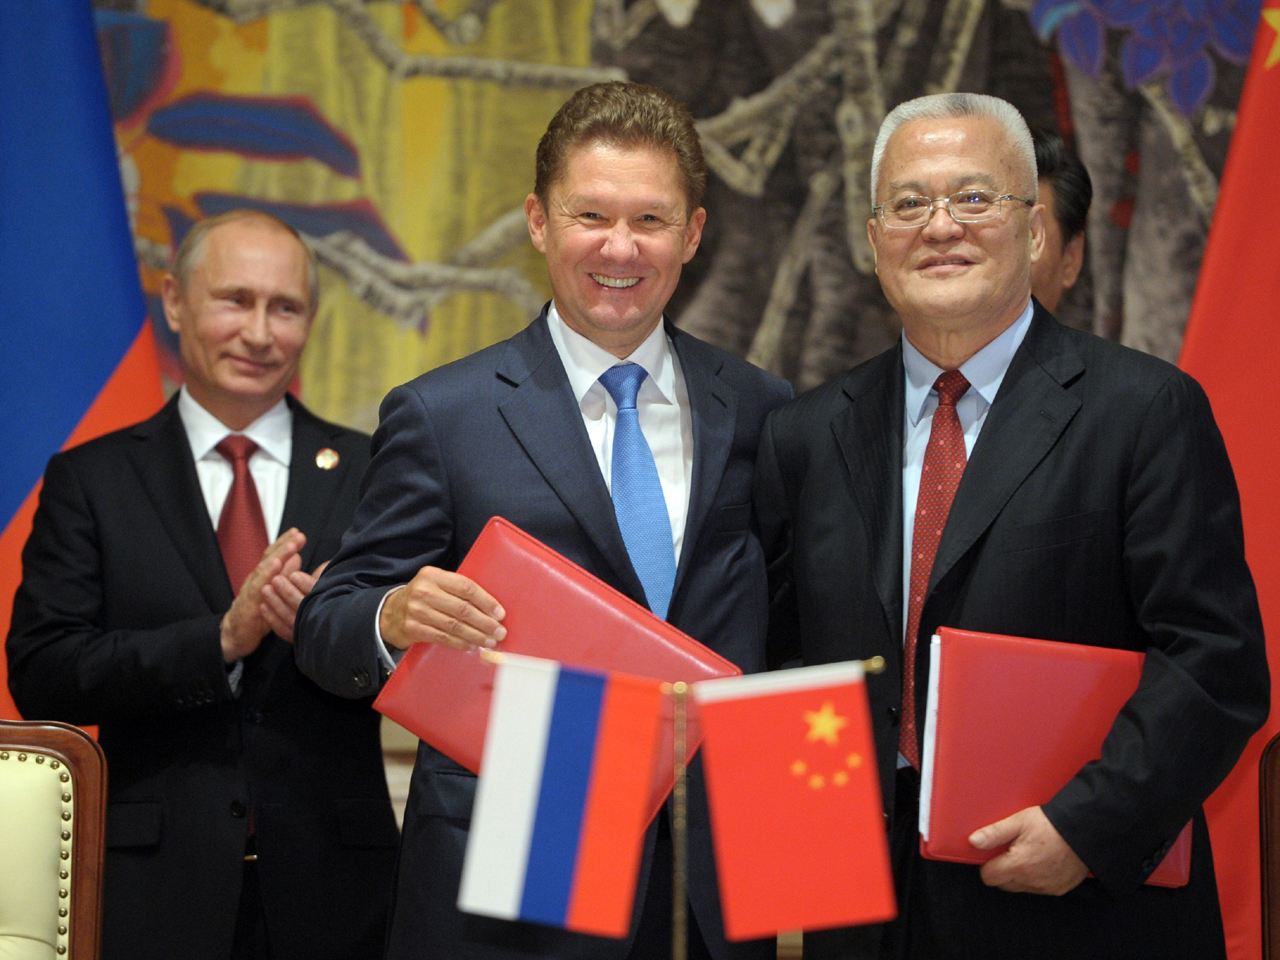 Russia and China sign historic gas agreement CBS News